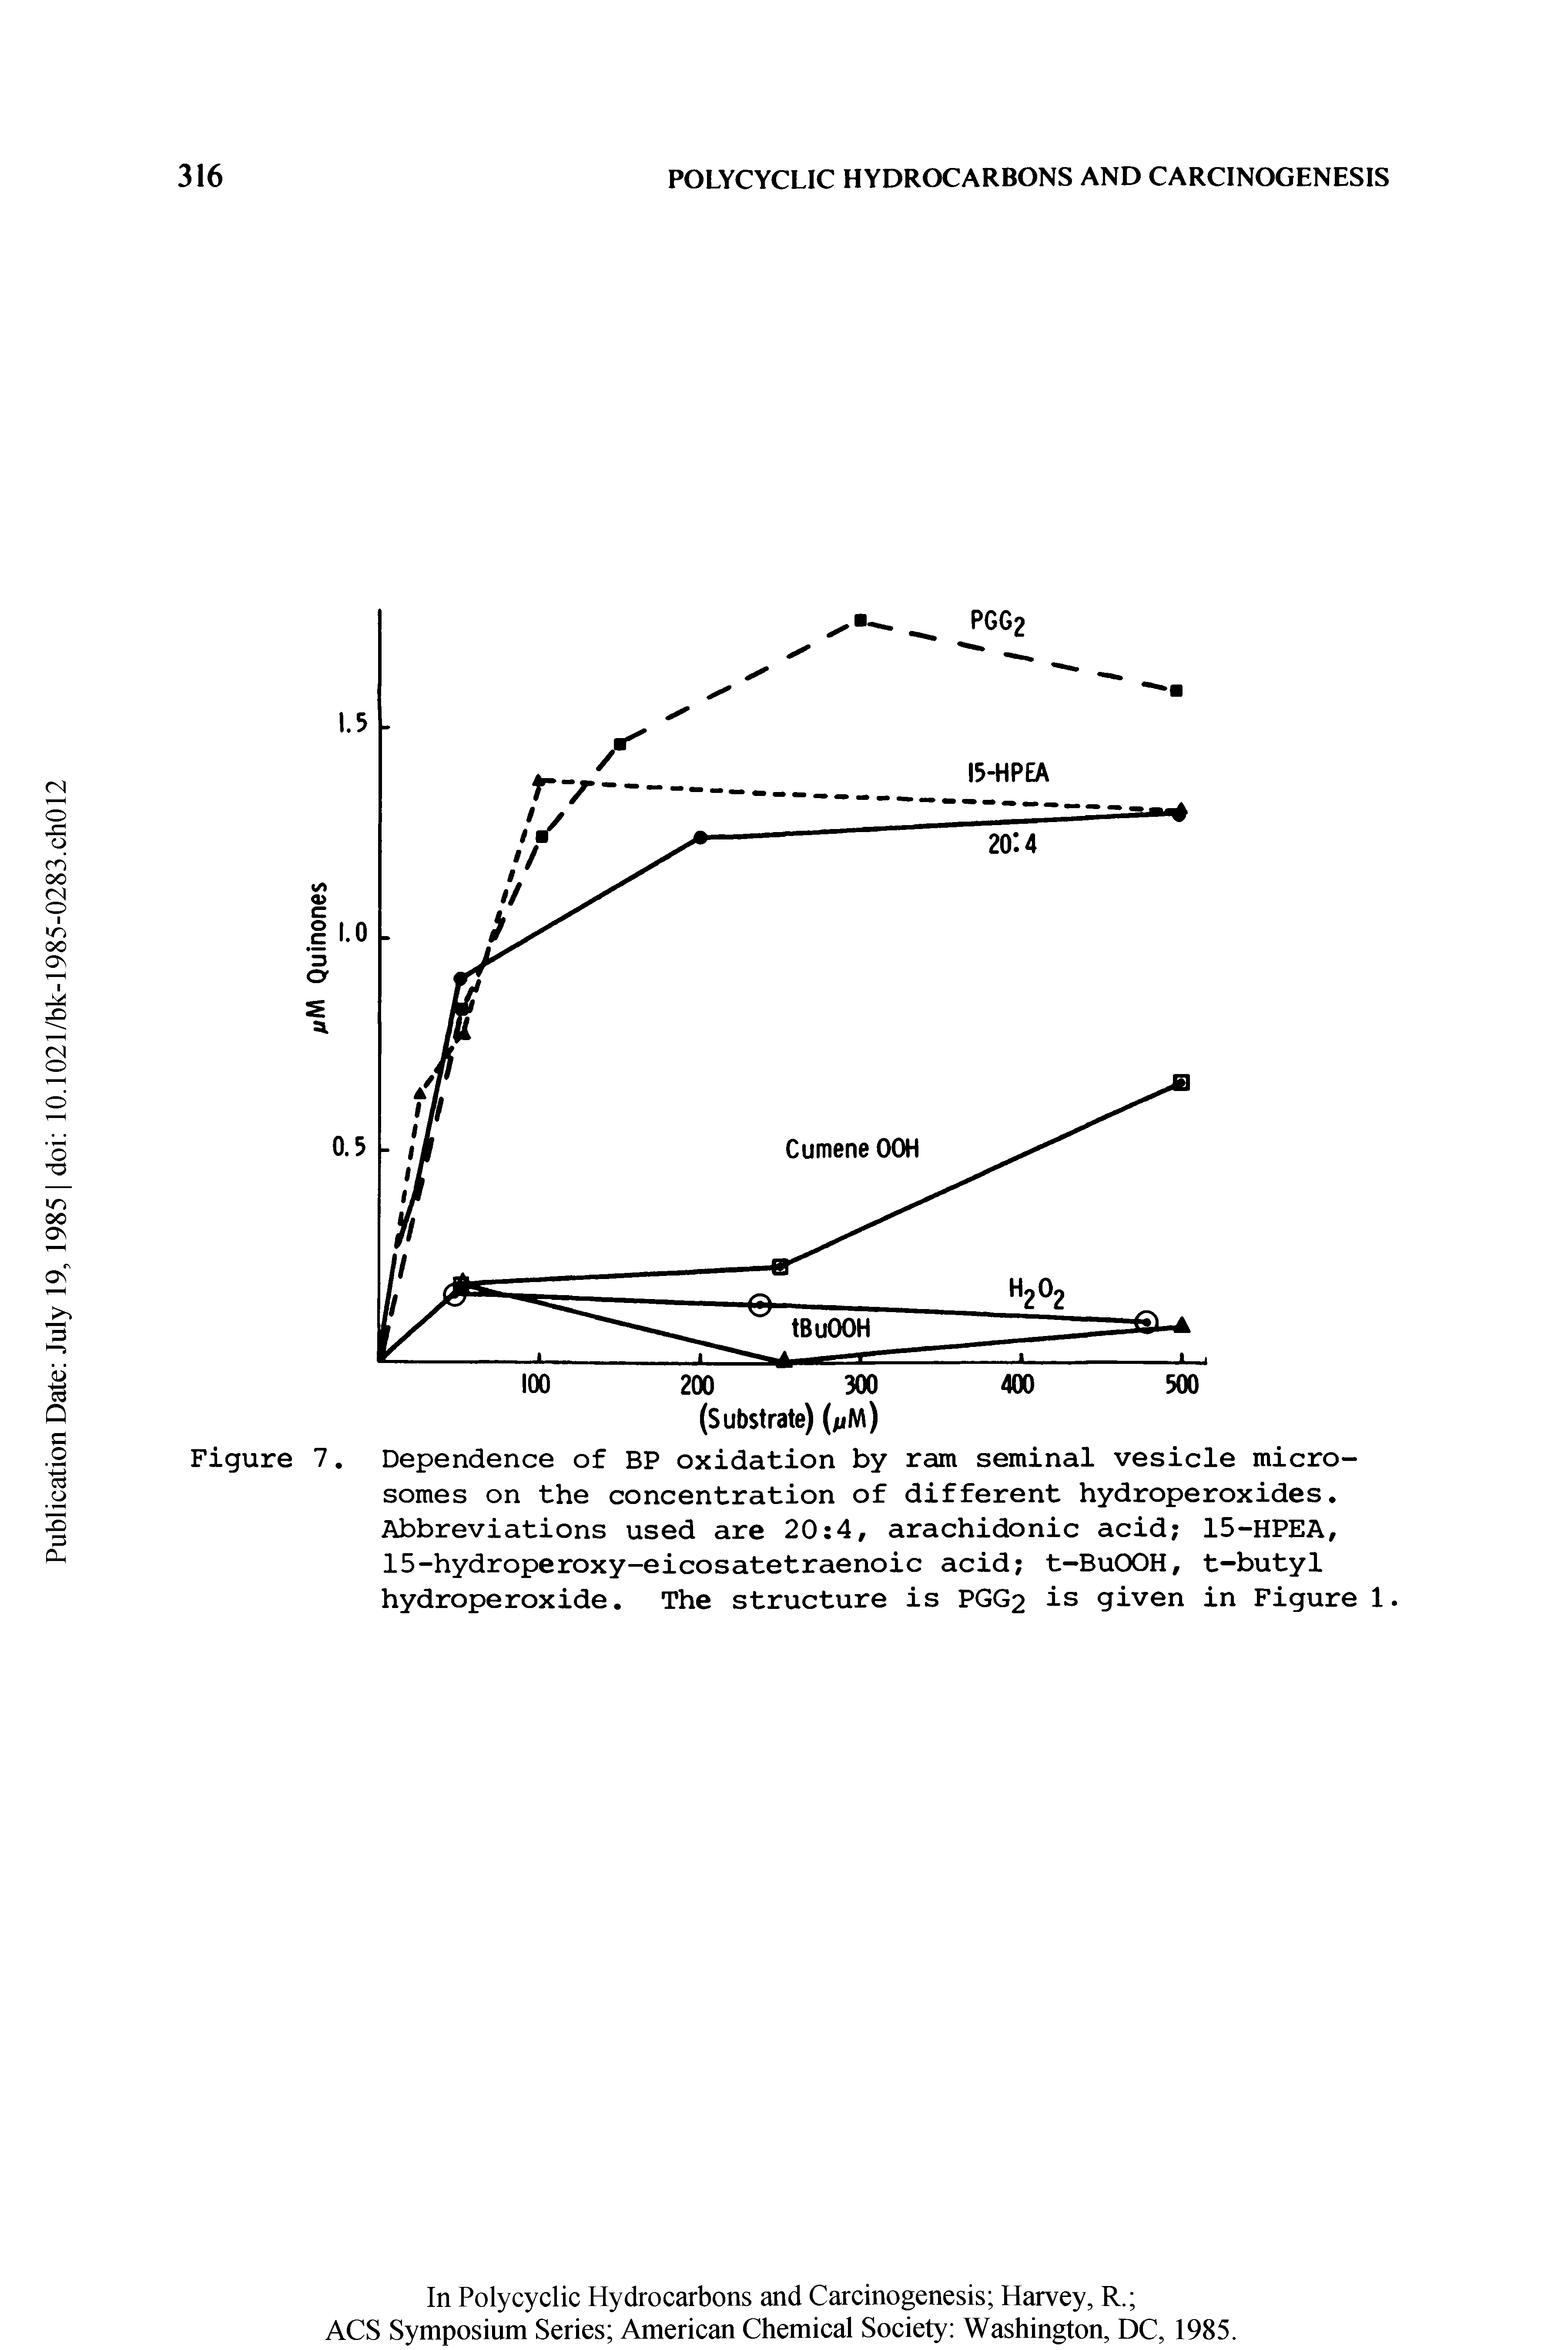 Figure 7. Dependence of BP oxidation by ram seminal vesicle micro-somes on the concentration of different hydroperoxides. Abbreviations used are 20 4, arachidonic acid 15-HPEA, 15-hydroperoxy-eicosatetraenoic acid t-BuOOH, t-butyl hydroperoxide. The structure is PGG2 is given in Figure 1.